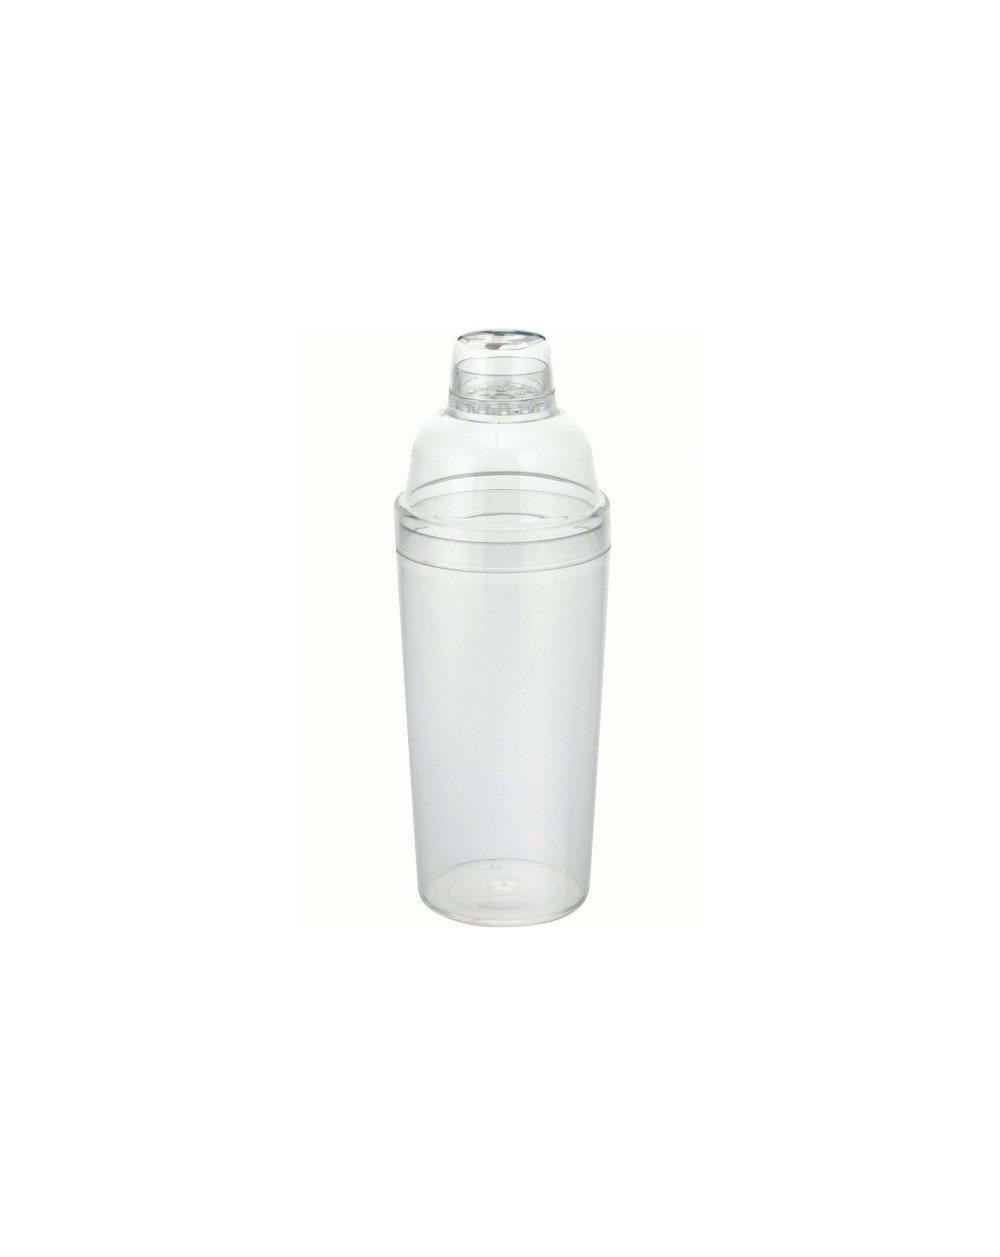 SHAKER 45cl.ACRIL.25800450  A160377